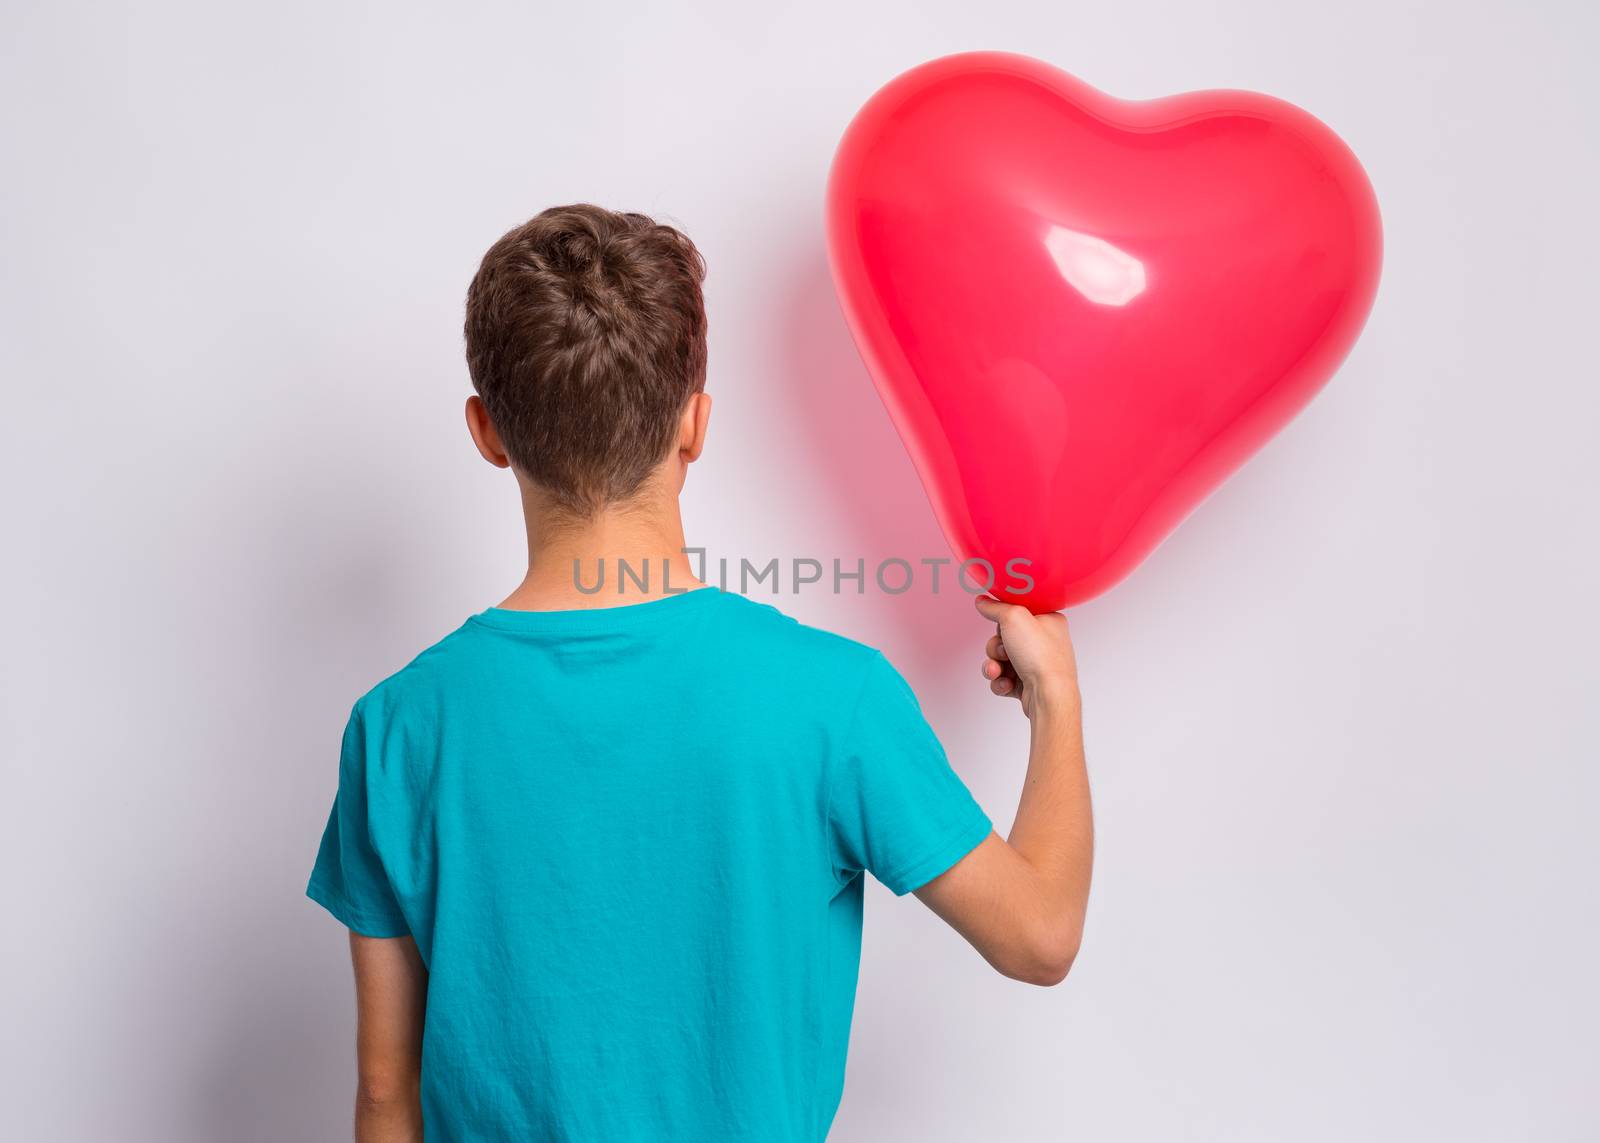 Back view. Portrait of teen boy holds red heart shaped balloon, on grey background. Child in blue t-shirt holding symbol of love, family, hope - rear view. Valentines Day concept.